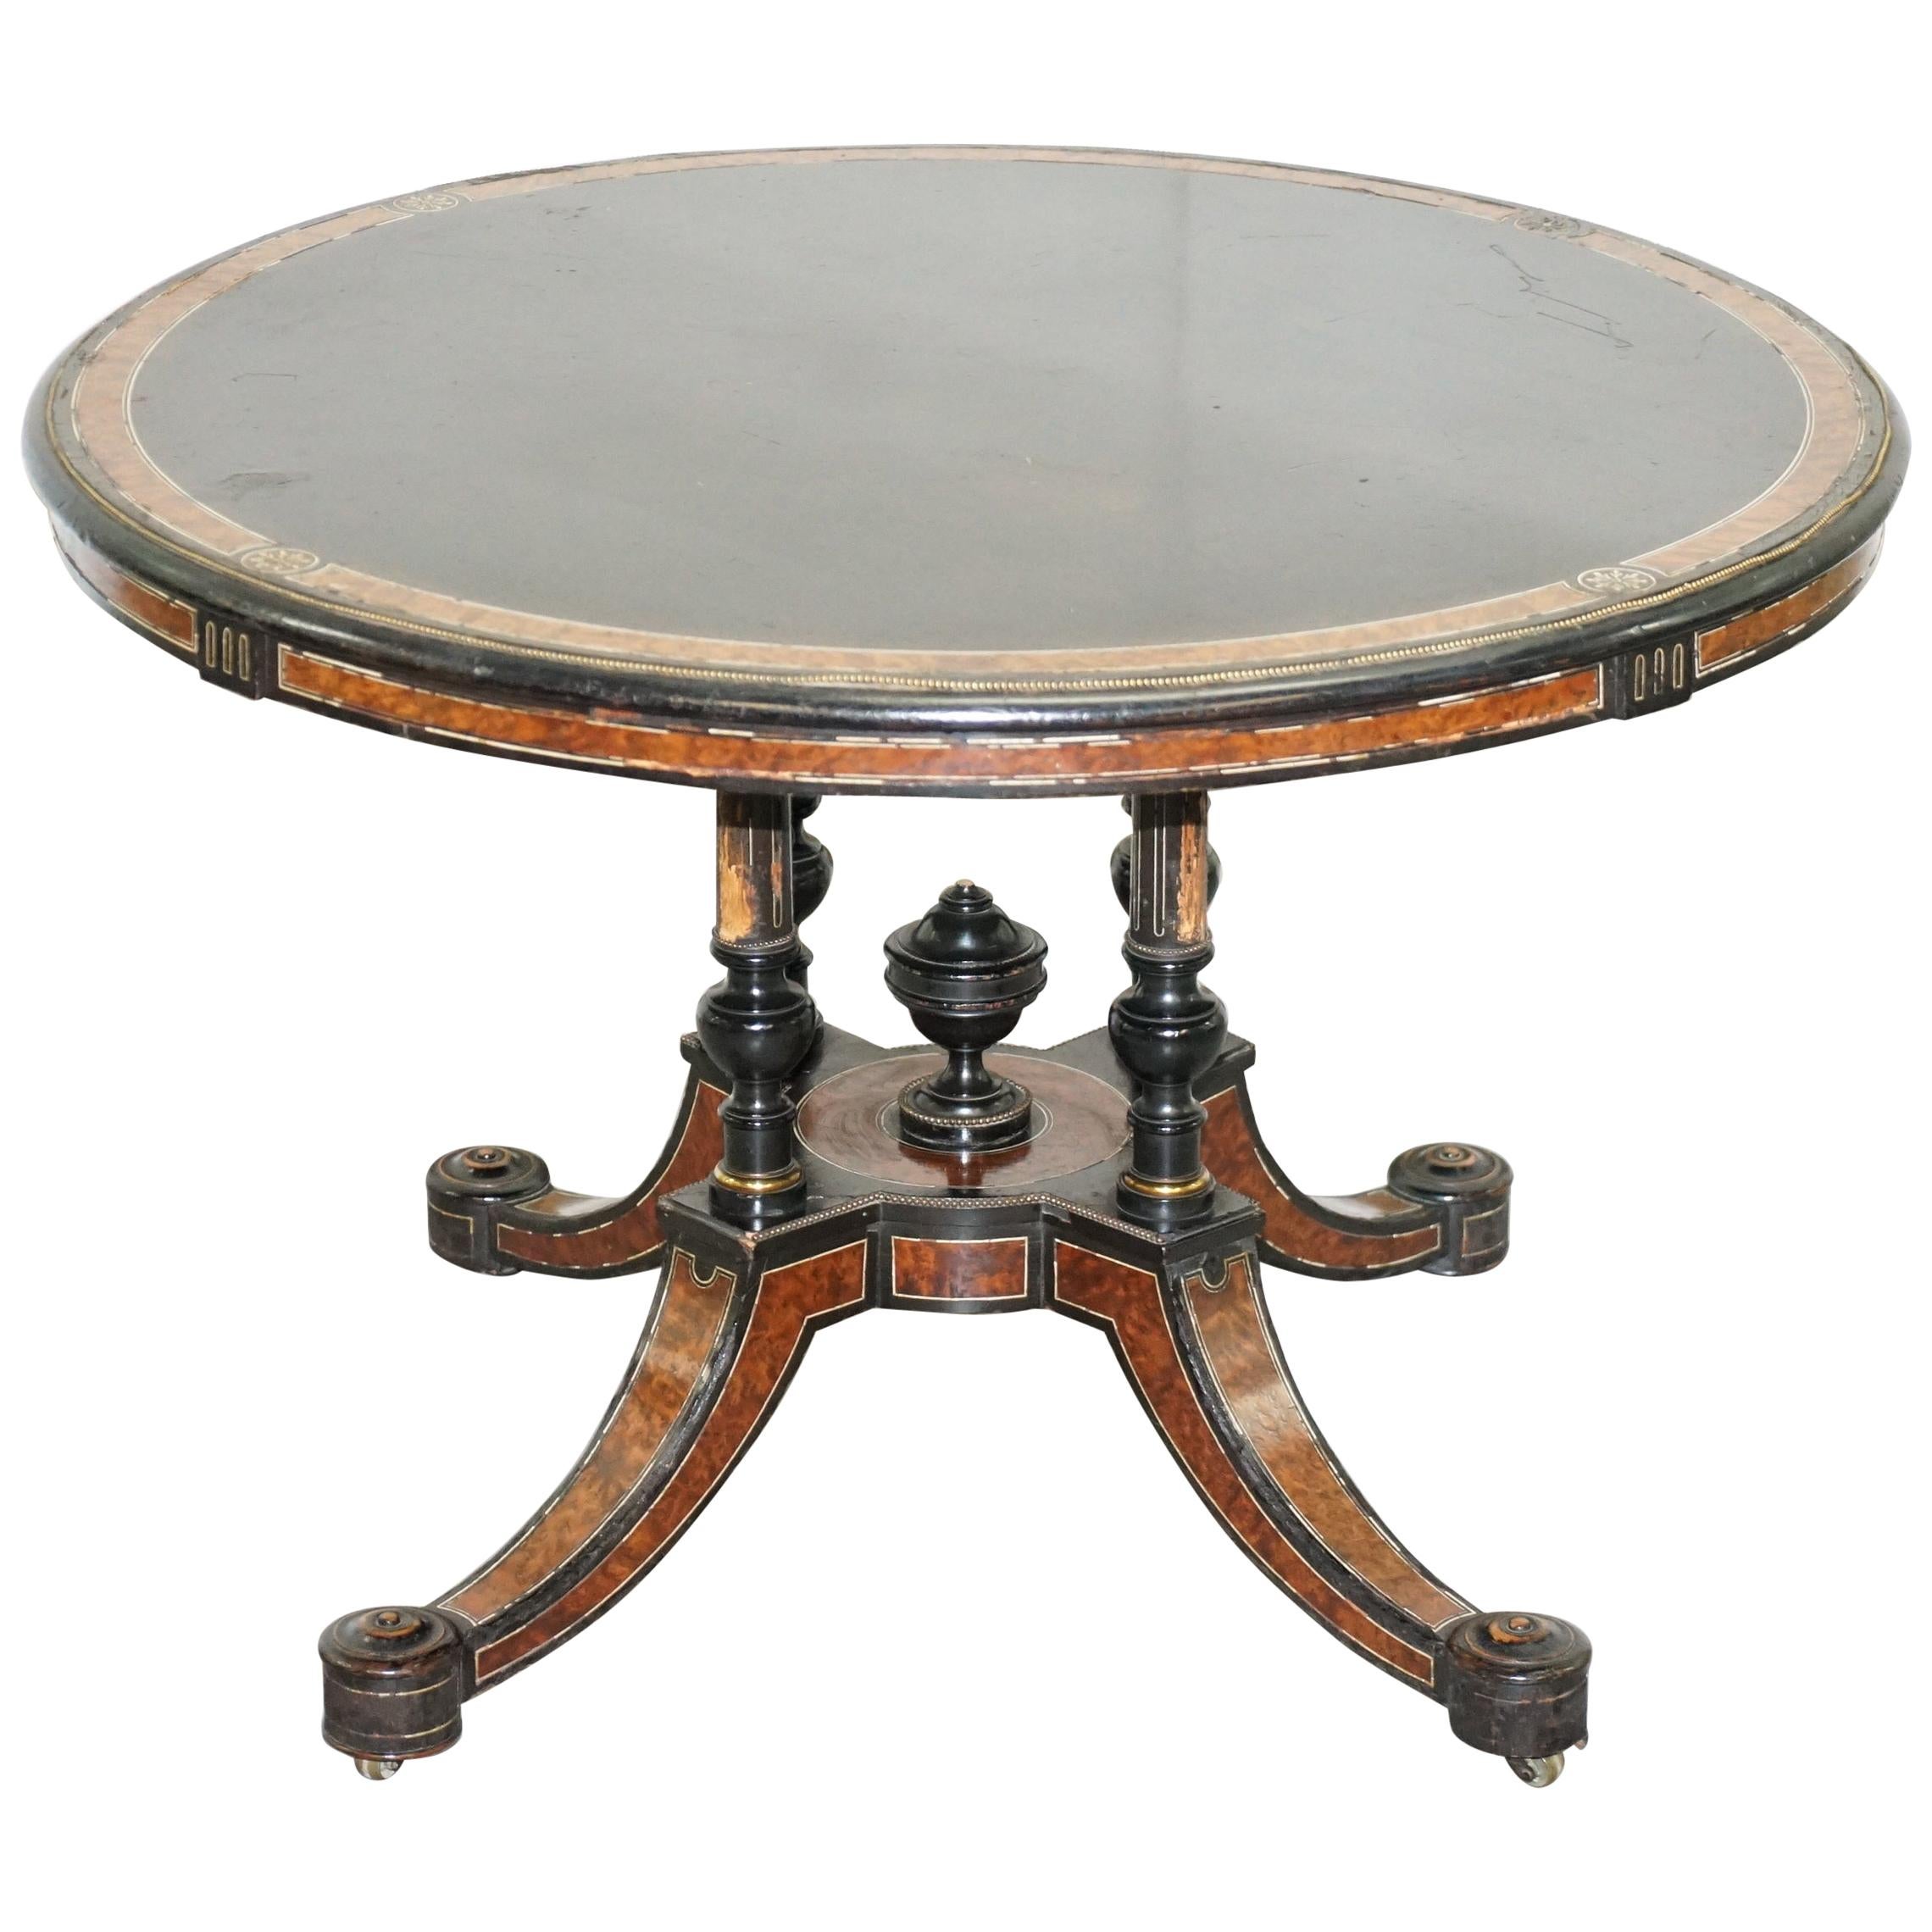 Rare Gillow & Co 1852-1857 Aesthetic Movement Burr Walnut Ebonised Dining Table For Sale